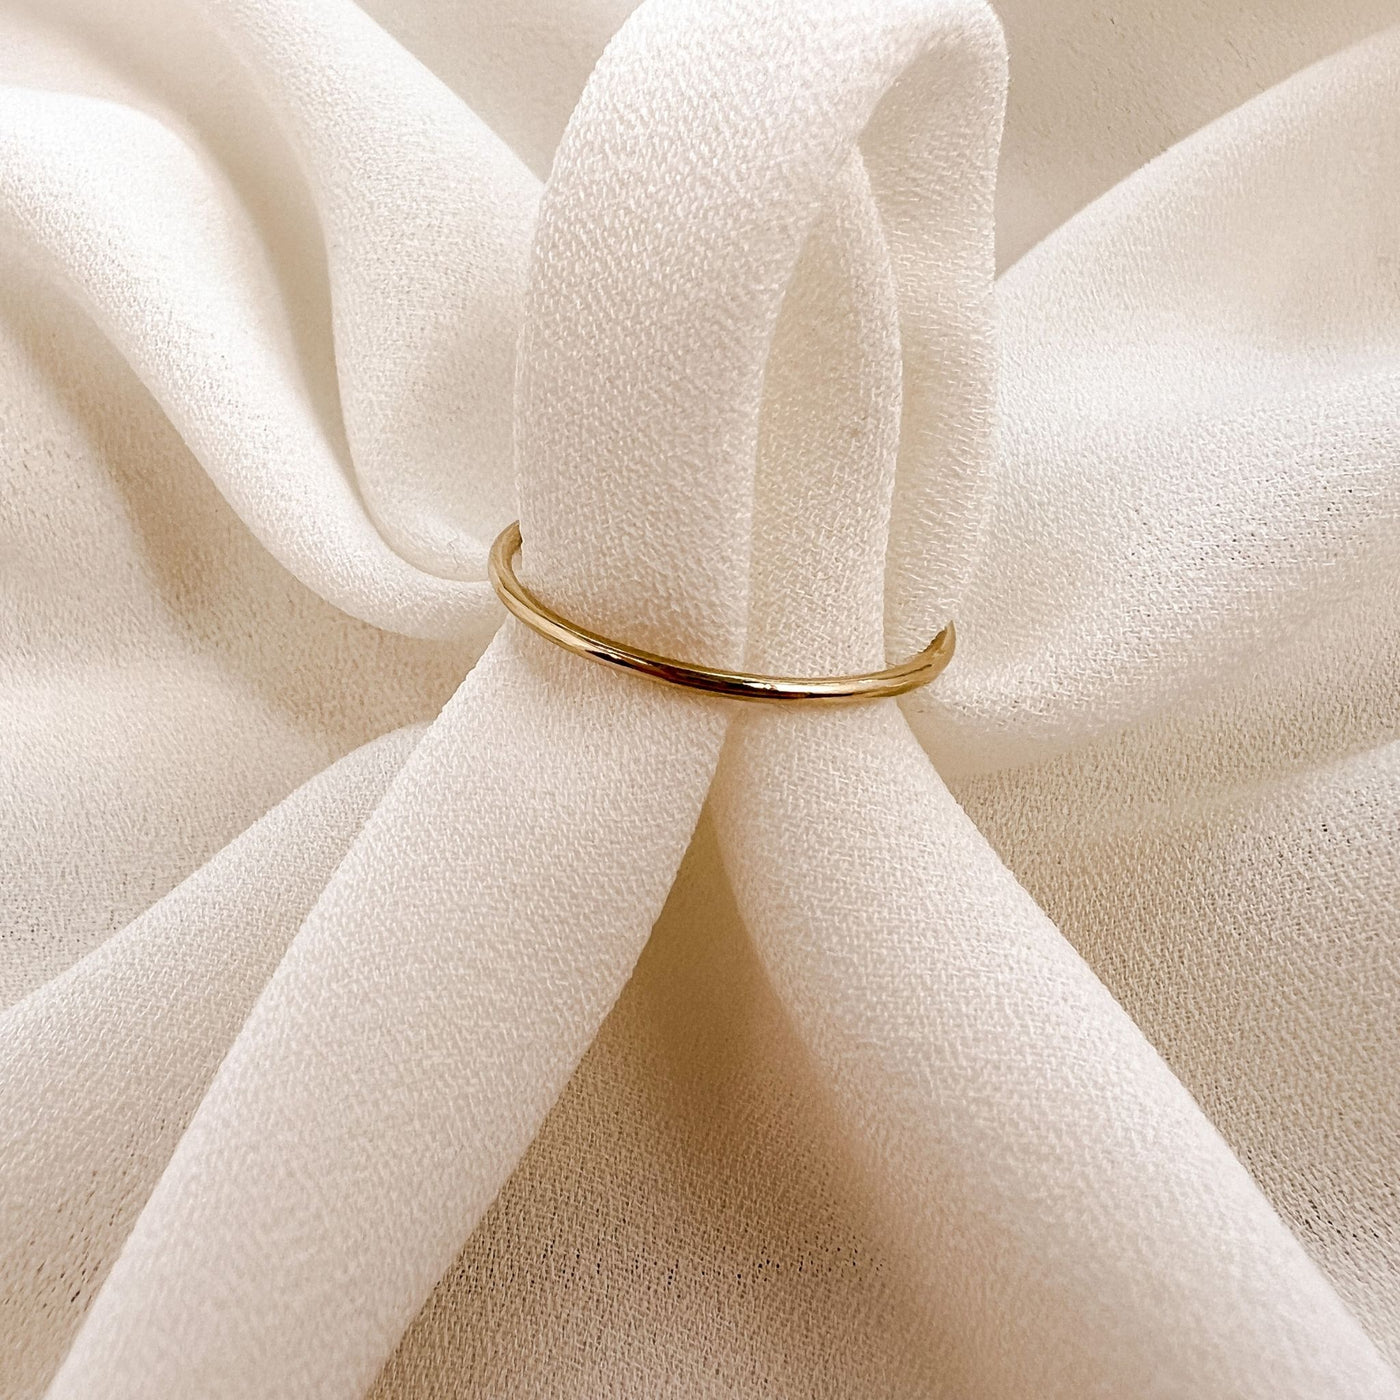 Simple 14Kgold filled 1mm band ring on cream coloured fabric 